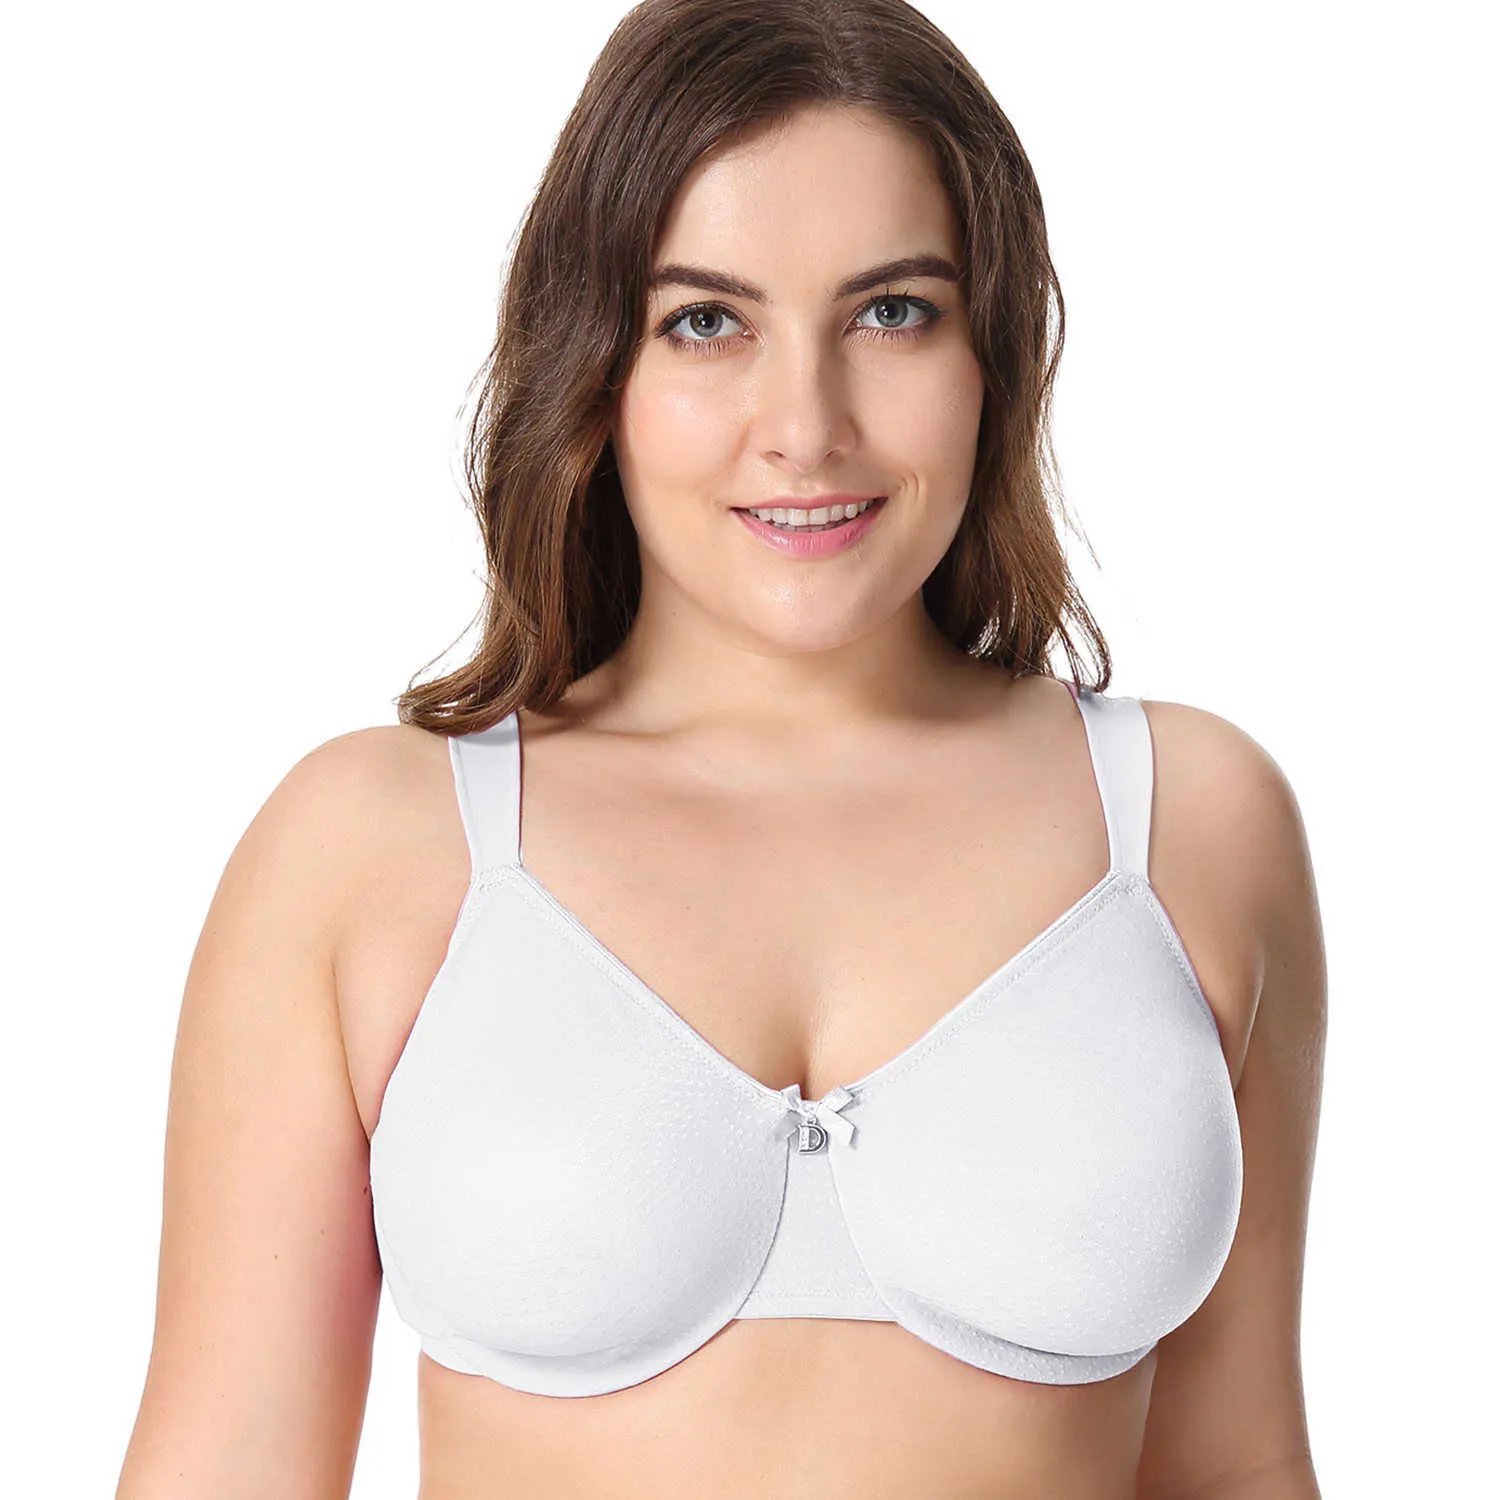 Plus Size Sheer Underwired Minimizer Barely Zero Bra For Women Perfect For Everyday  Wear 210623 From Dou01, $11.95